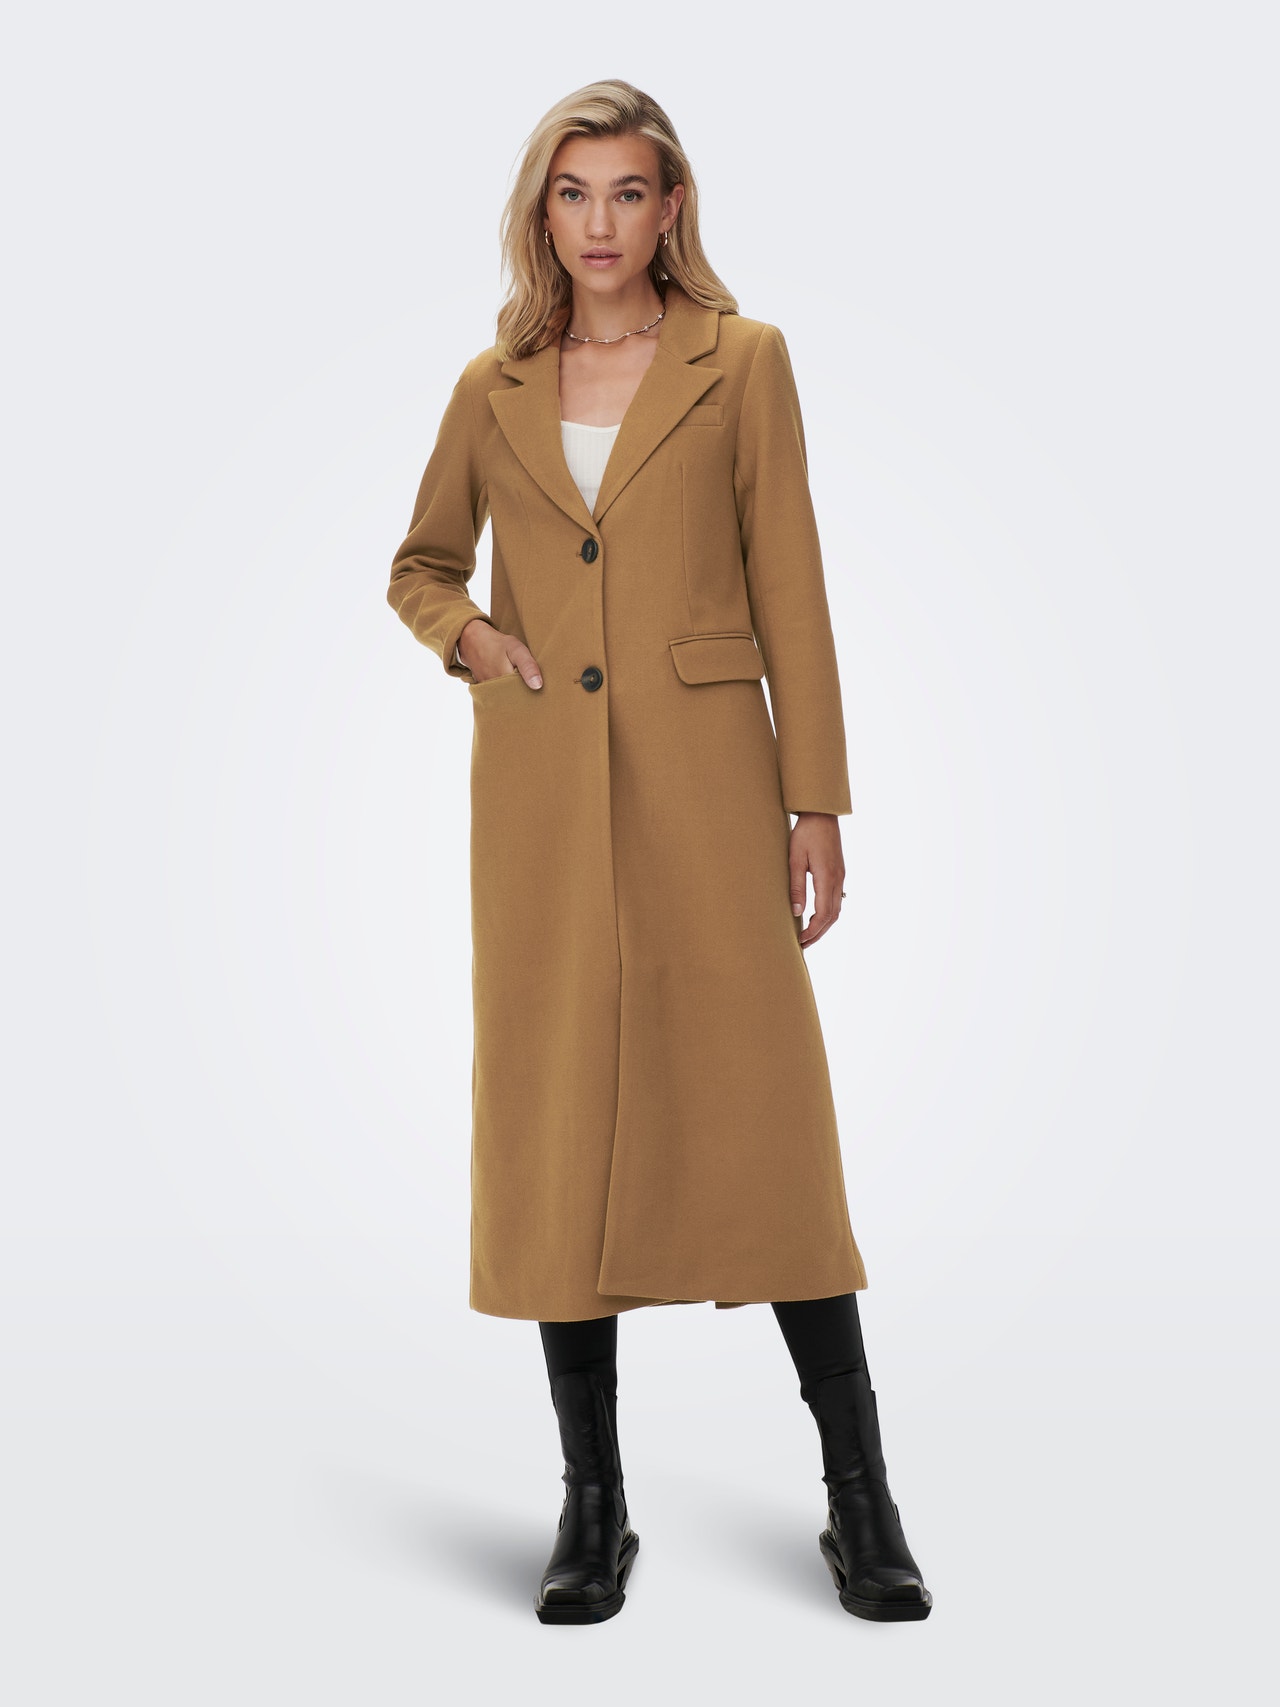 ONLY X-long coat -Toasted Coconut - 15228607